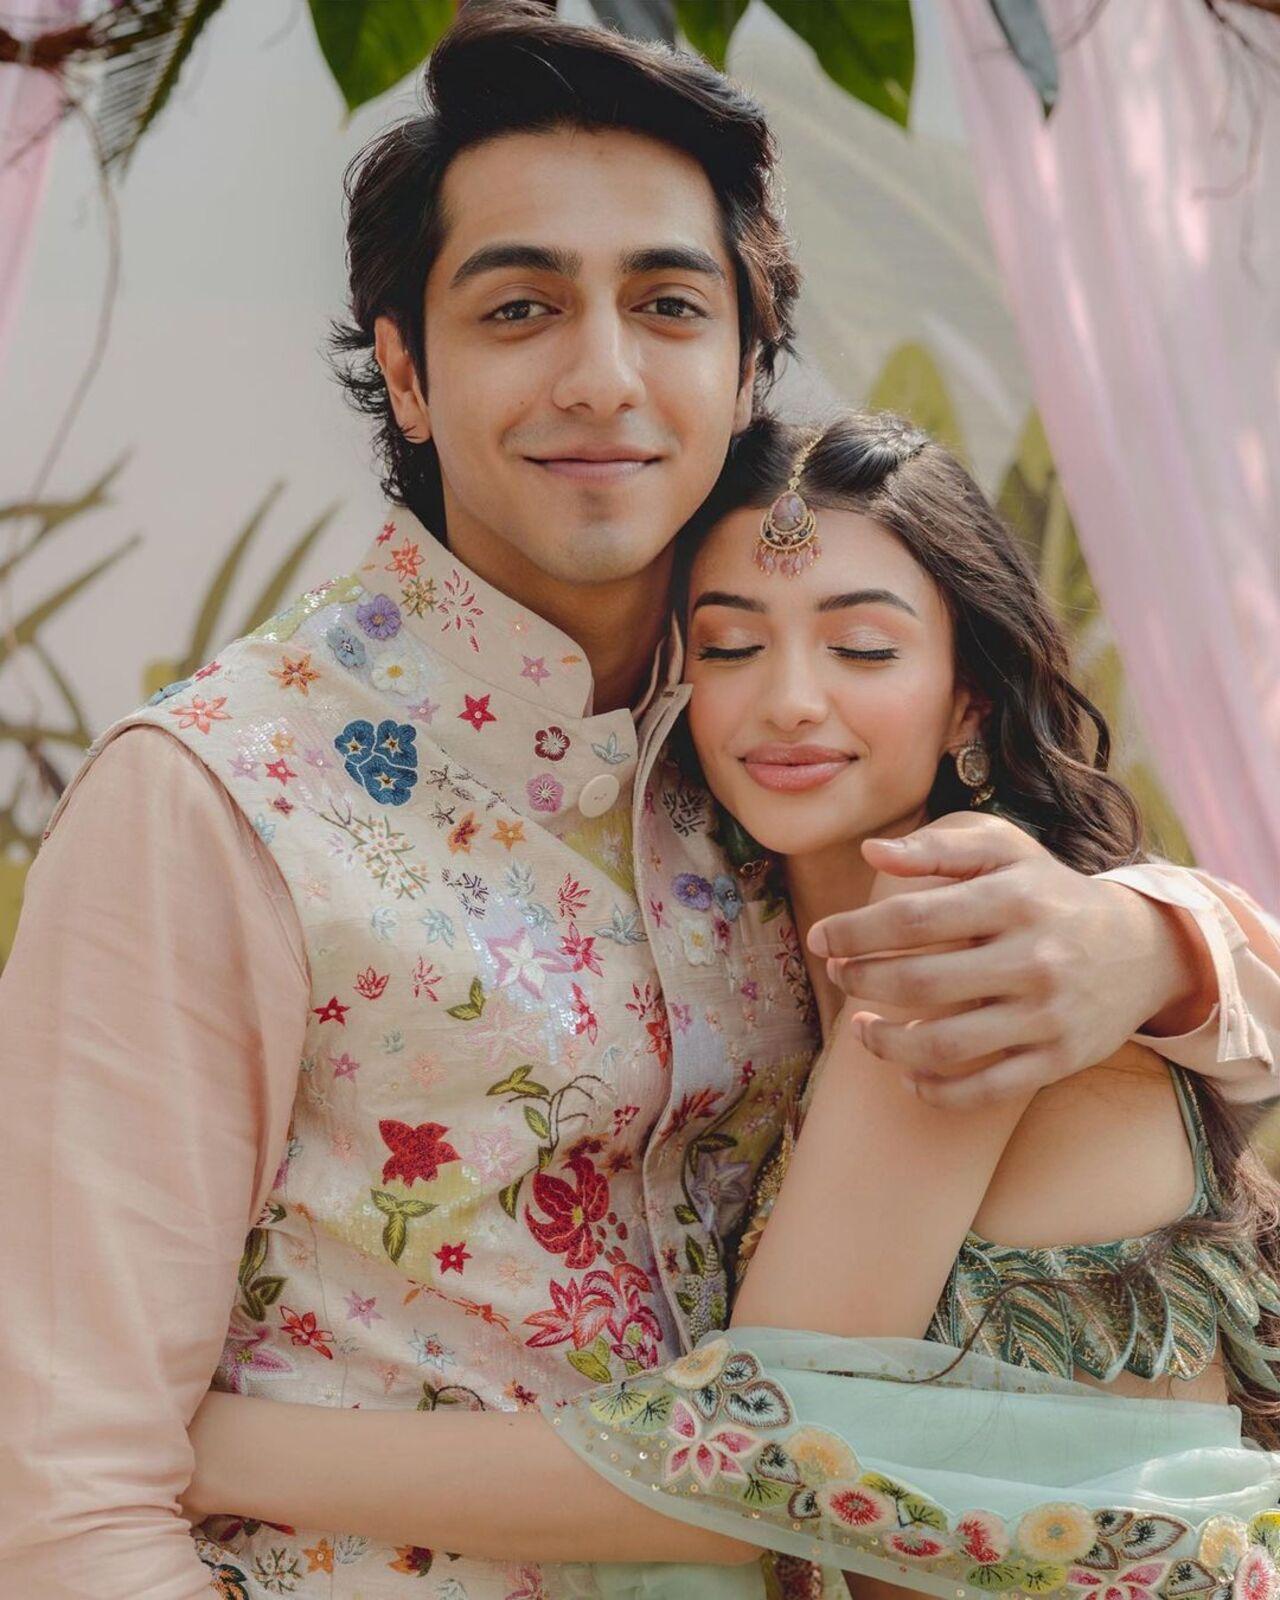 Alanna Panday got married to Ivor earlier this year. Her pre-wedding photoshoots were with her brother Ahaan Pandey and cousins including Ananya Panday